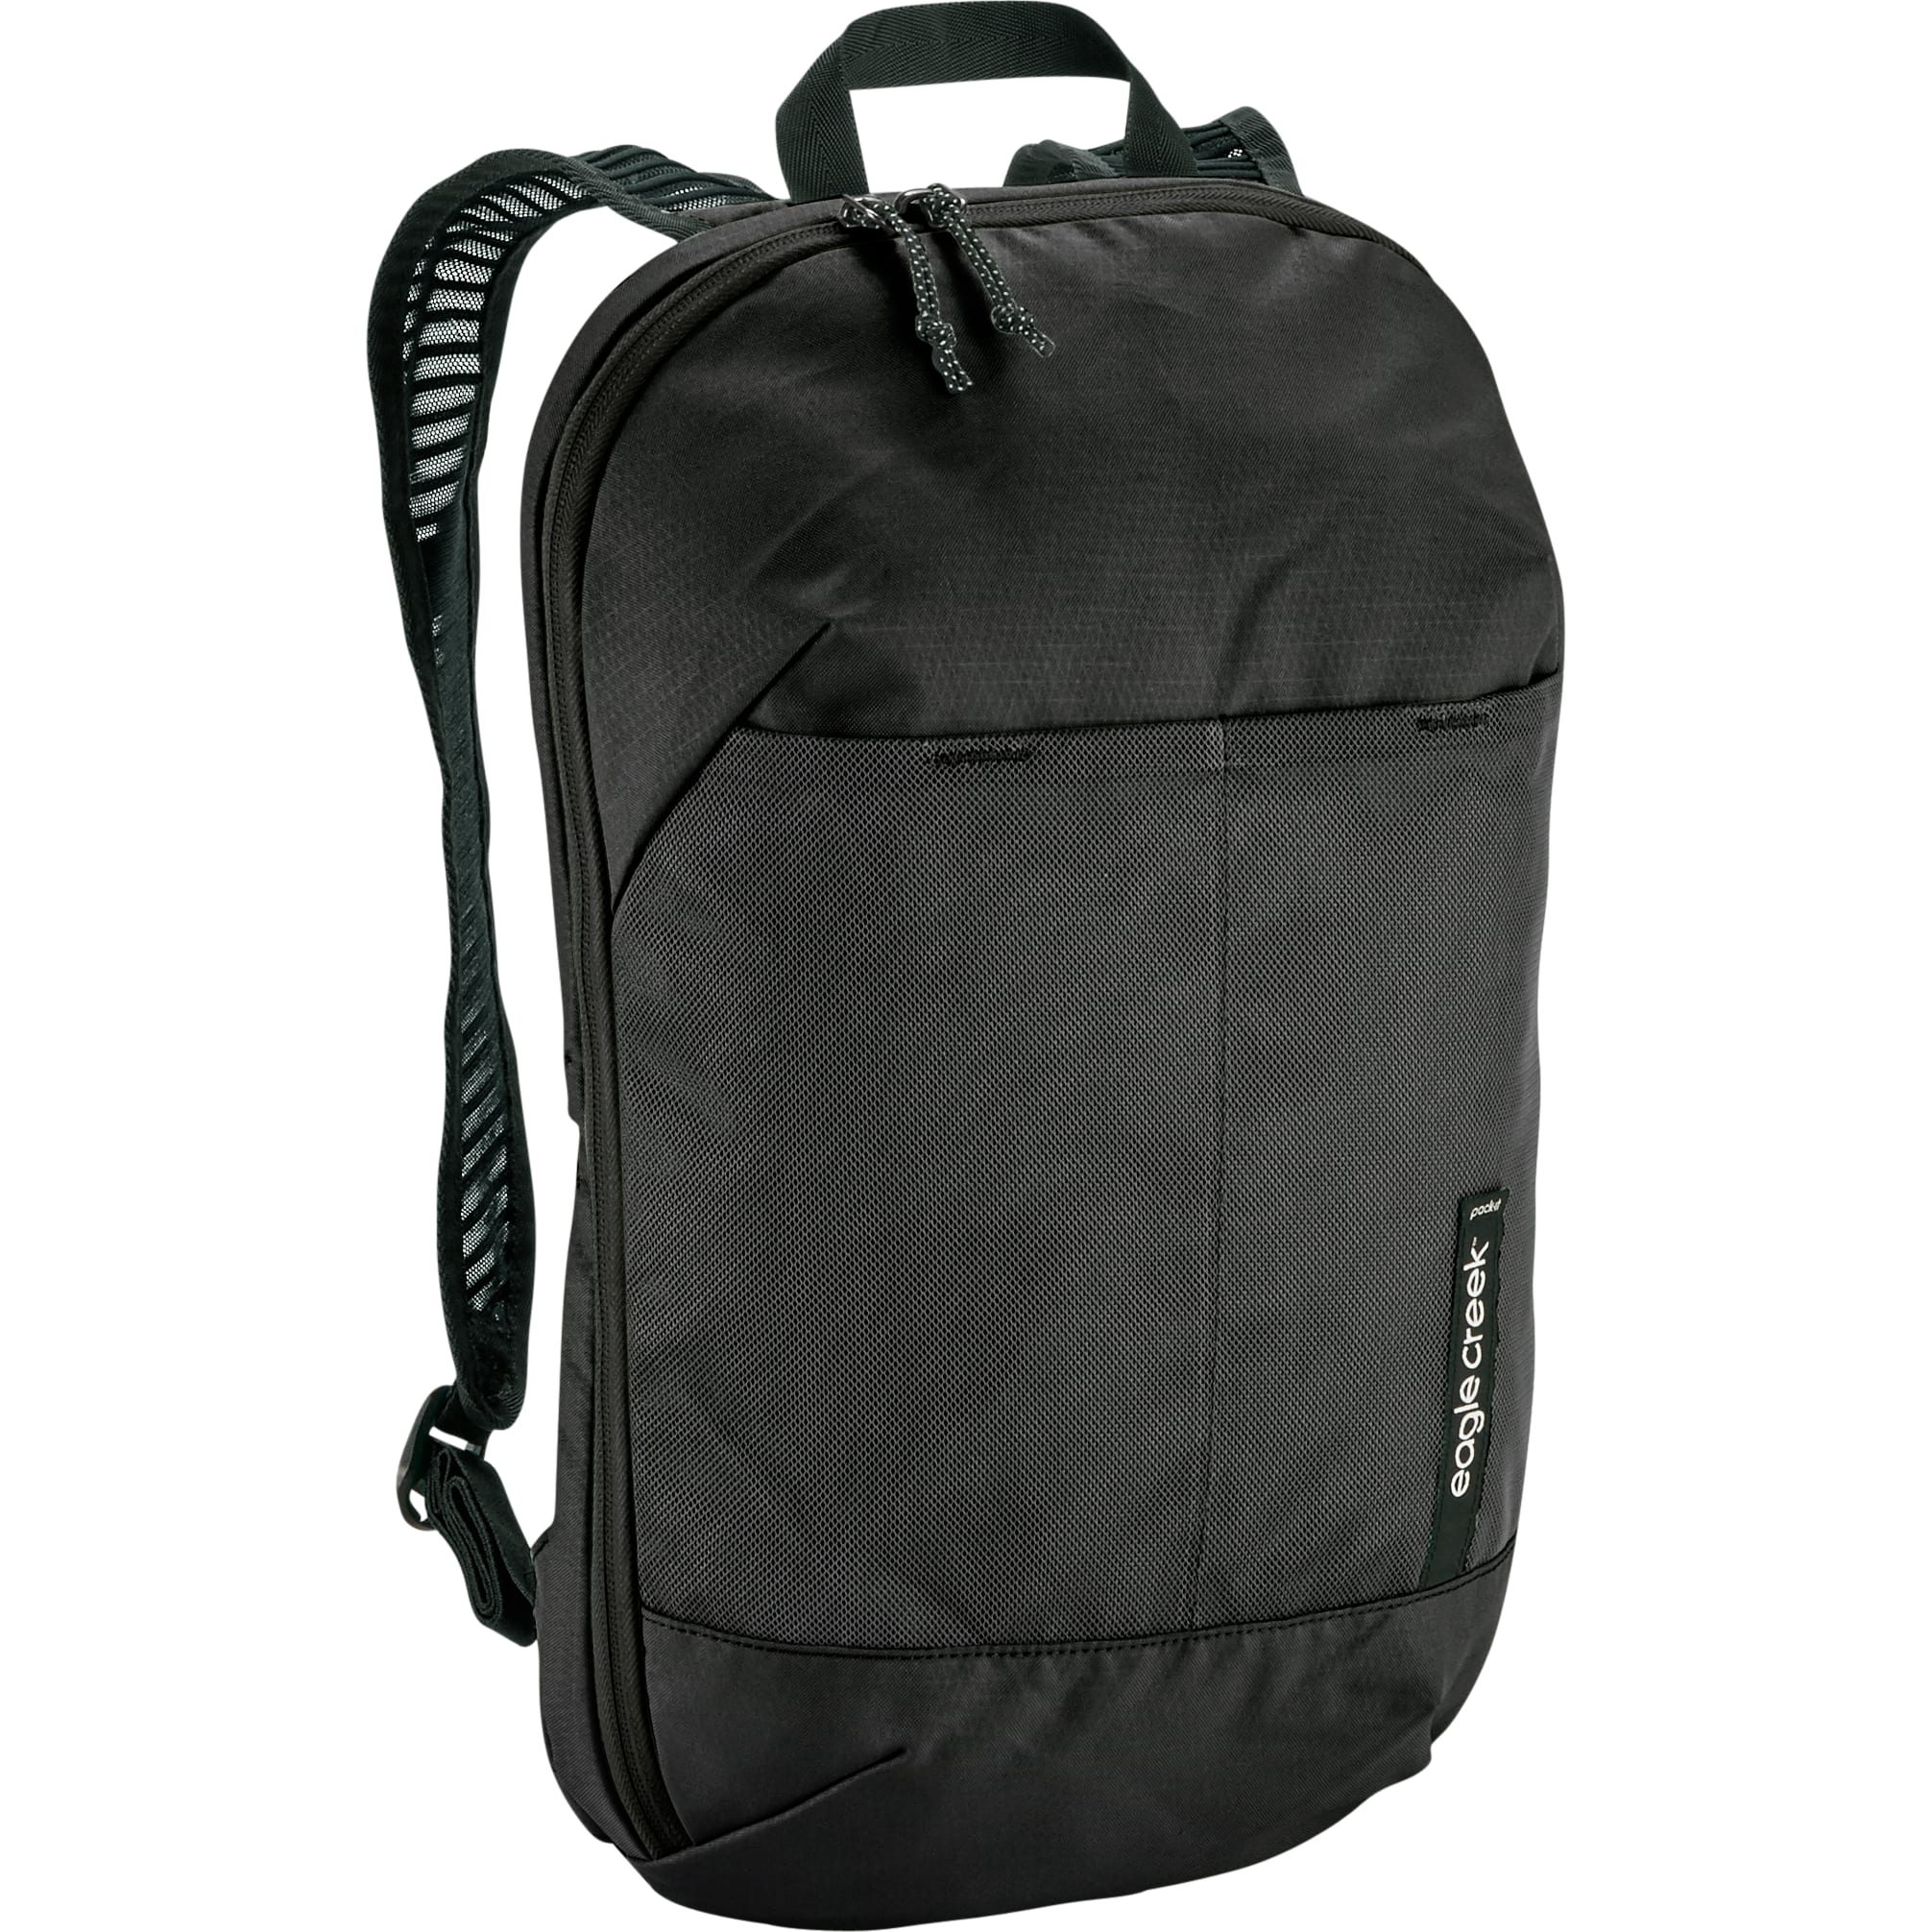 Pack-It Reveal Org Convertible Pack Black